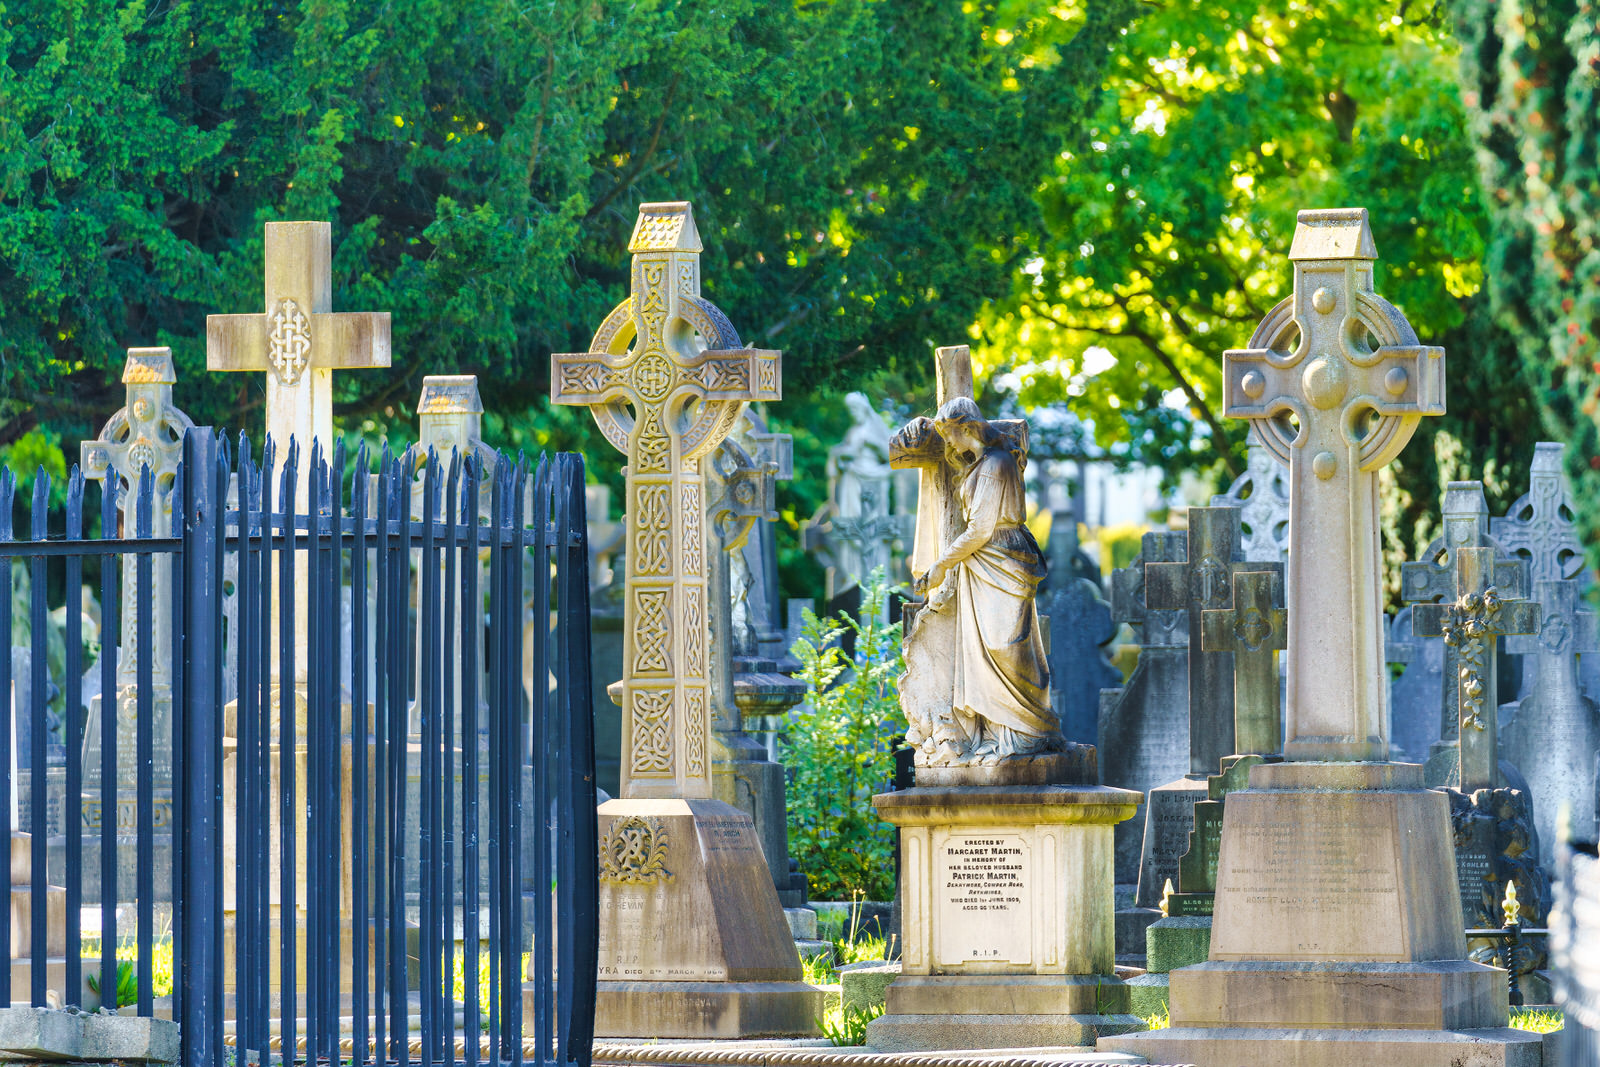 THE OLDER SECTION OF GLASNEVIN CEMETERY [I USED A SONY 70-200MM GM LENS] 004